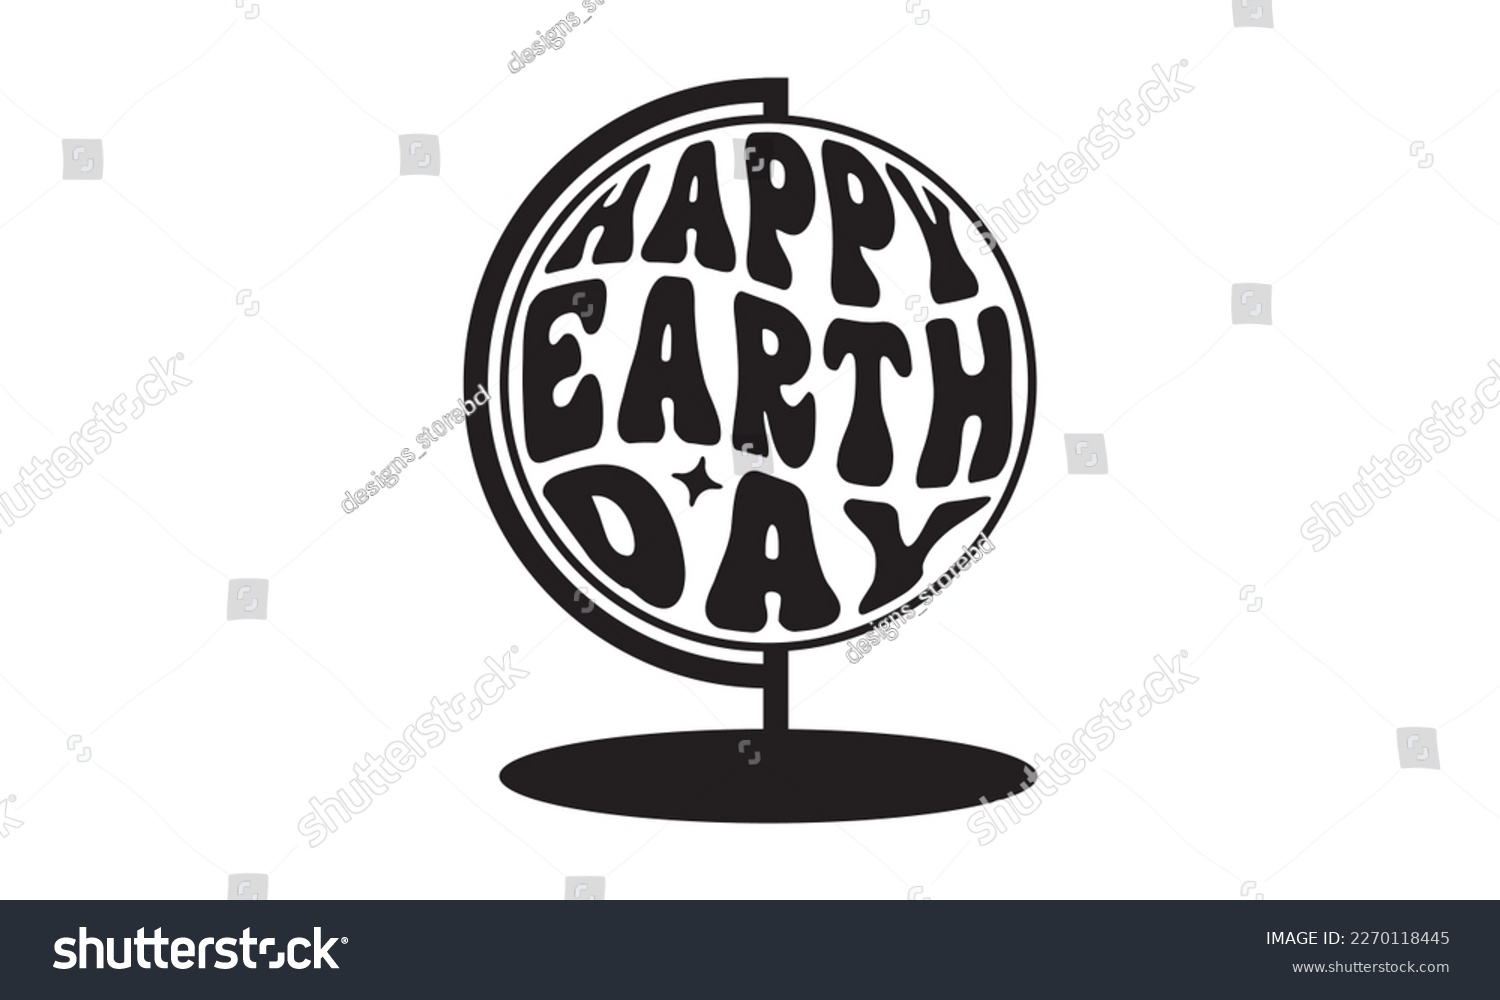 SVG of Happy Earth day svg, Earth day svg design bundle, Earth tshirt design bundle, April 22, earth vecttor icon map space, cut File Cricut, Printable Vector Illustration, tshirt eps svg